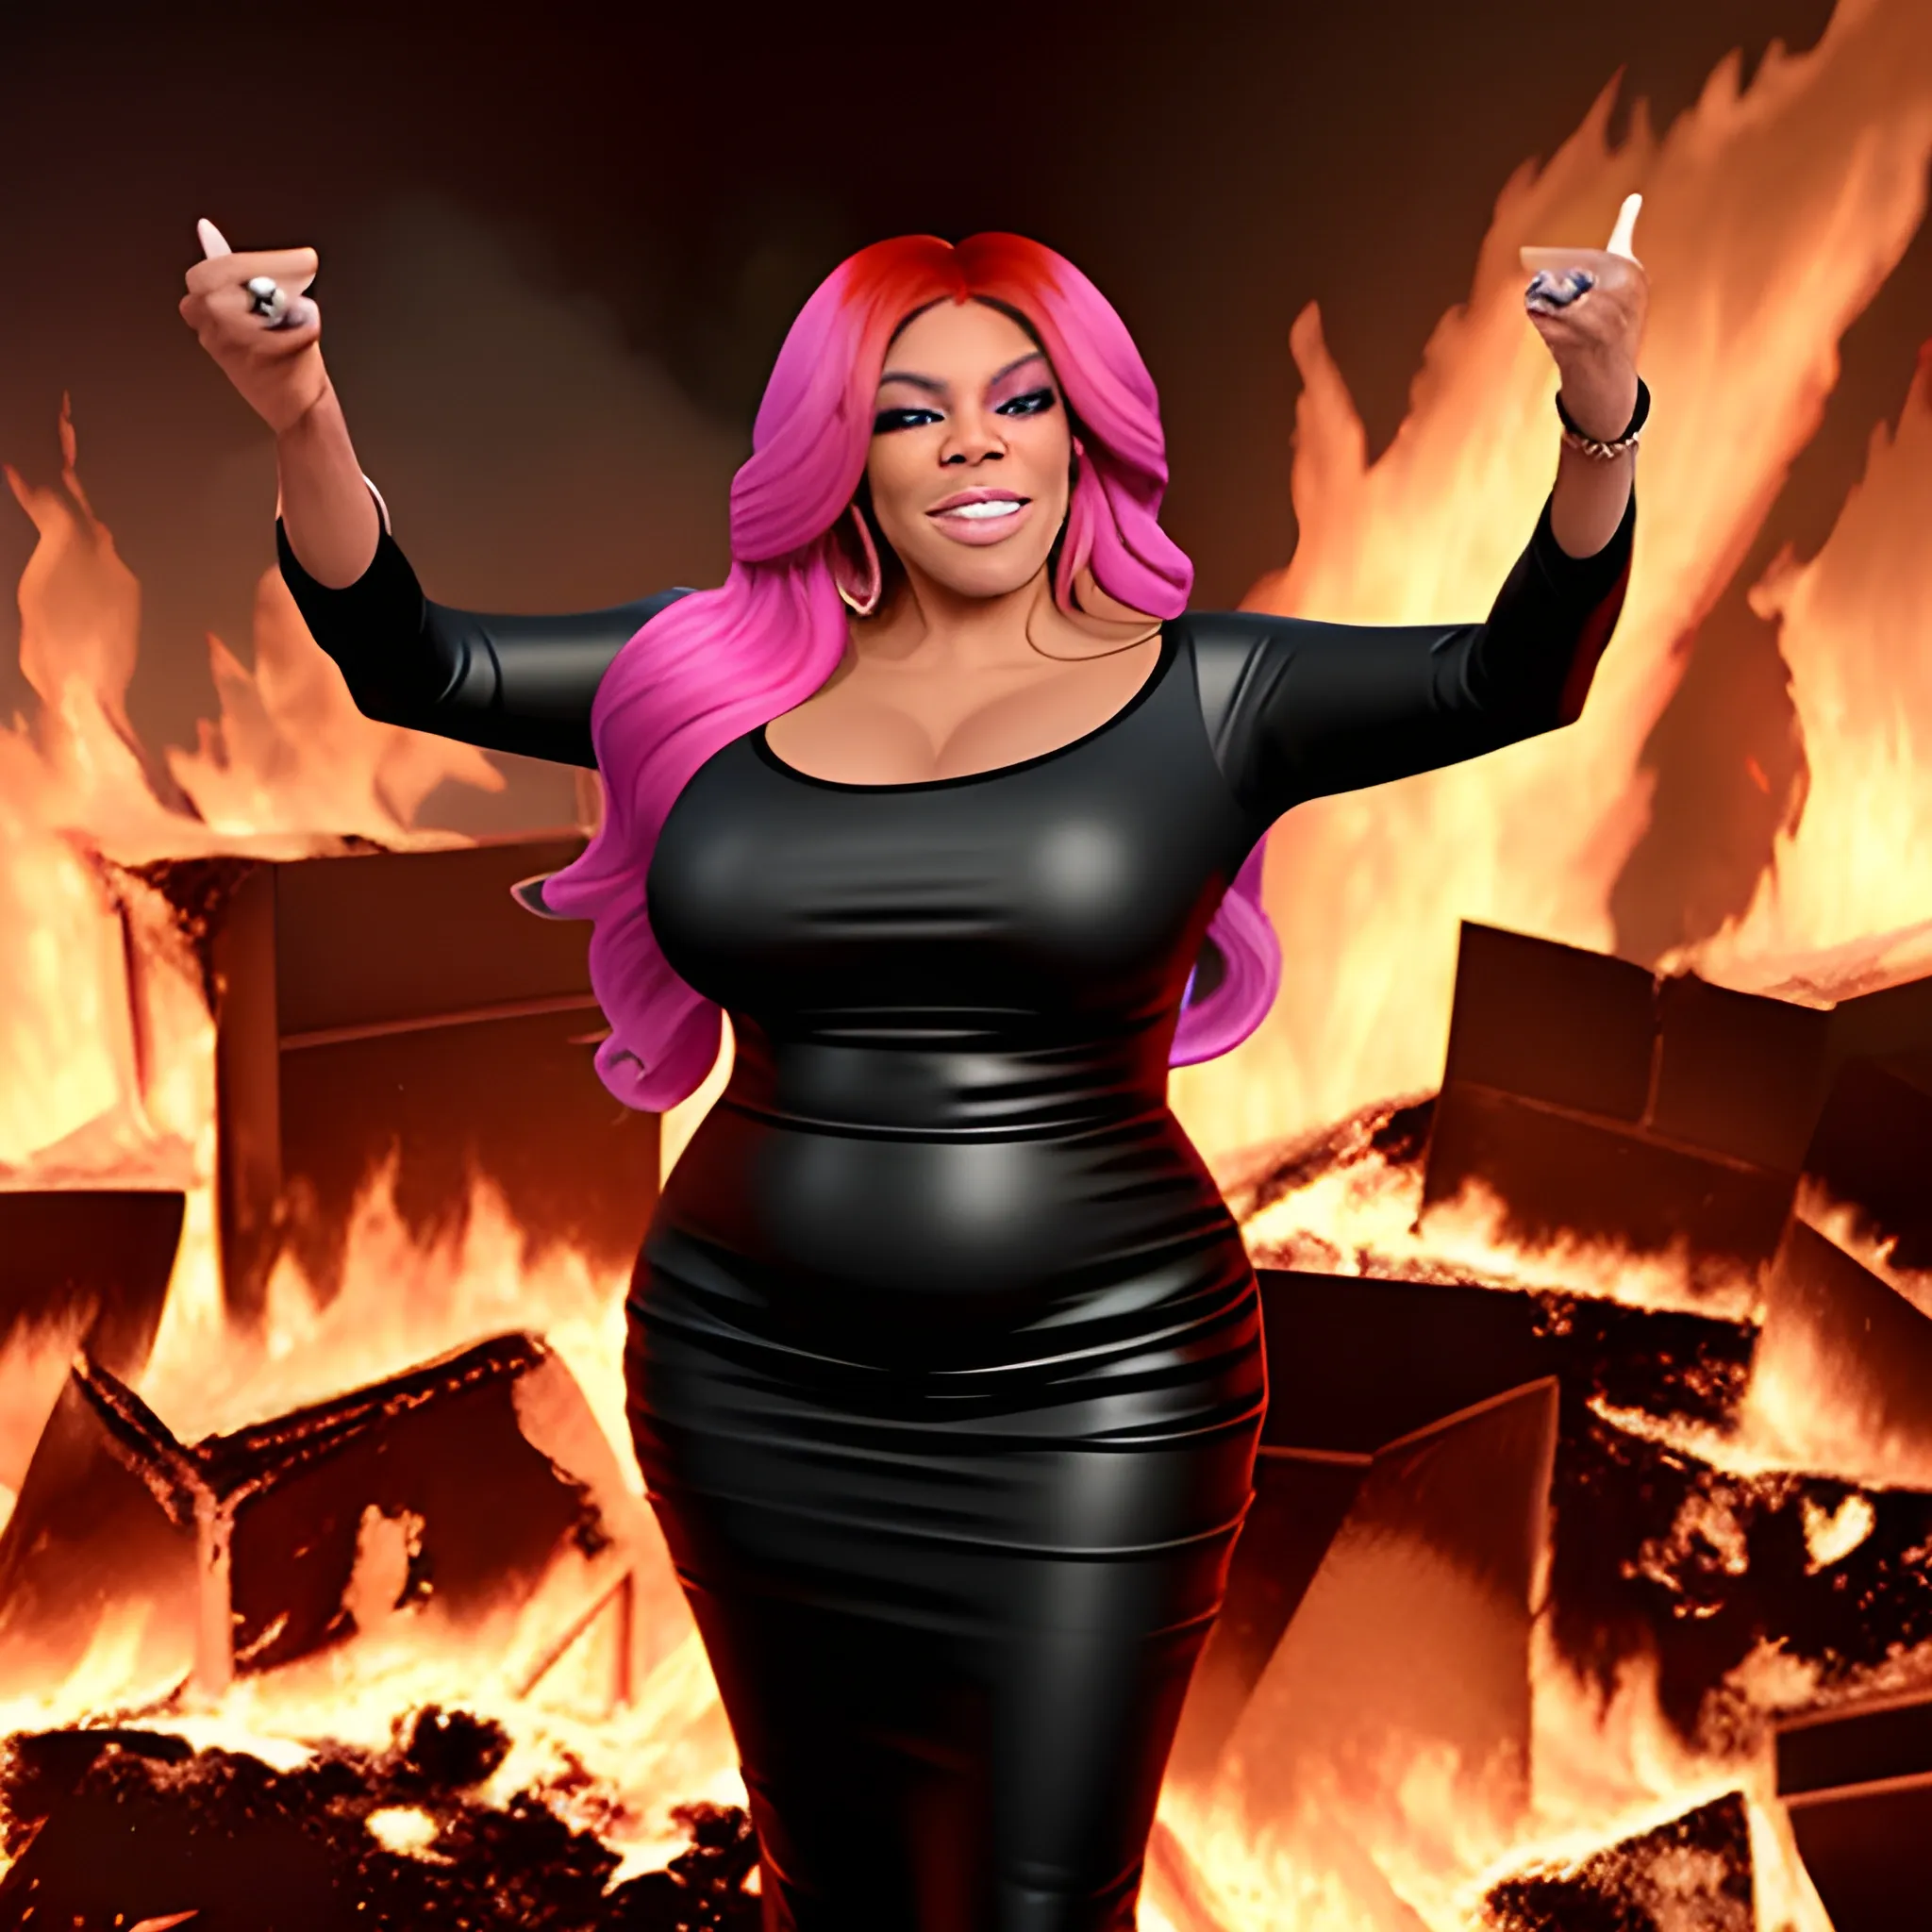 wendy williams doing hot topics while on fire, 3d